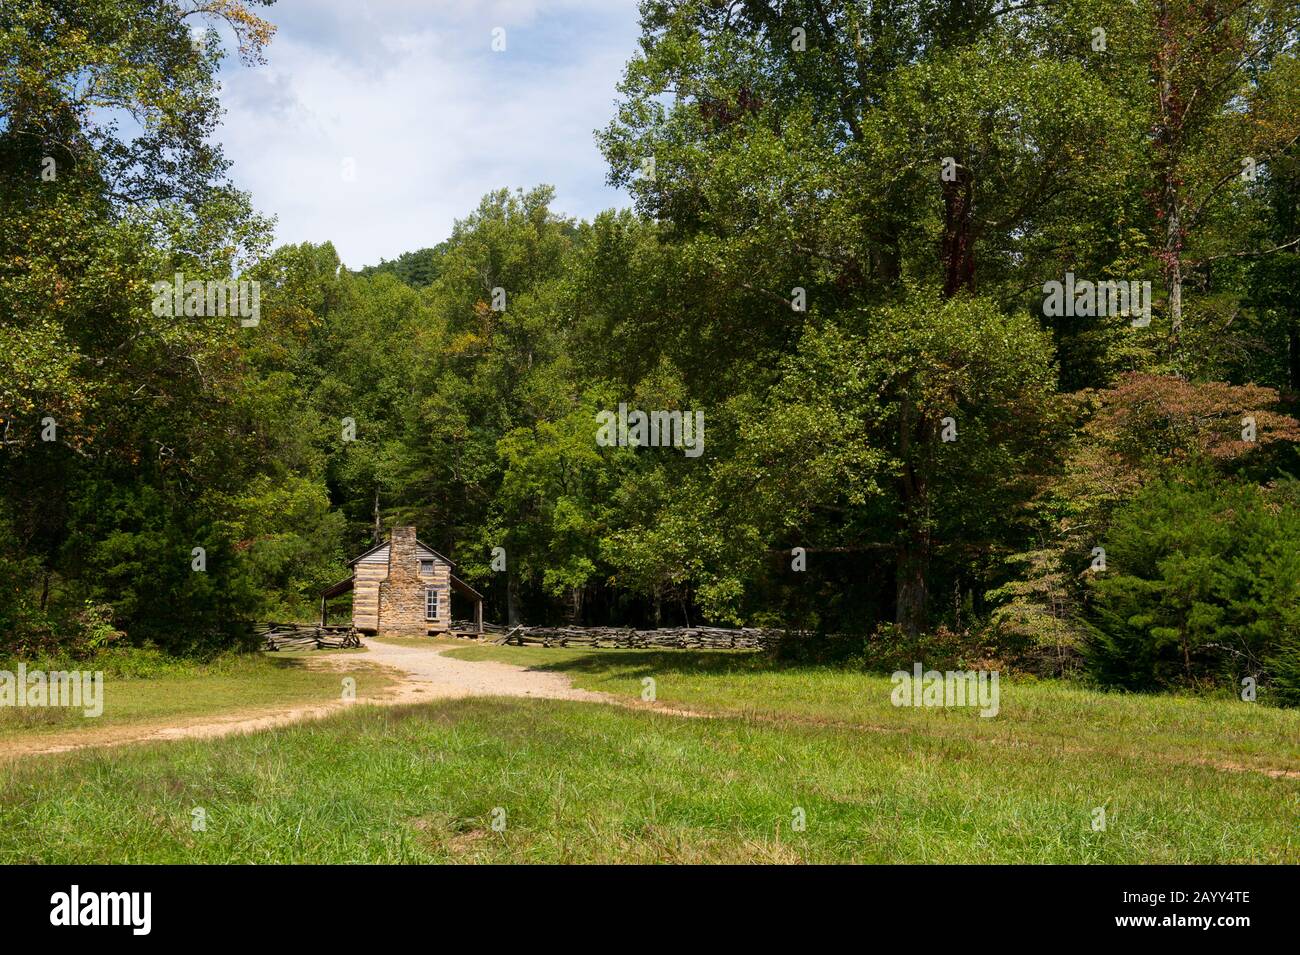 View of the John Oliver cabin from the 1820s in Cades Cove, Great Smoky Mountains National Park in Tennessee, USA. Stock Photo